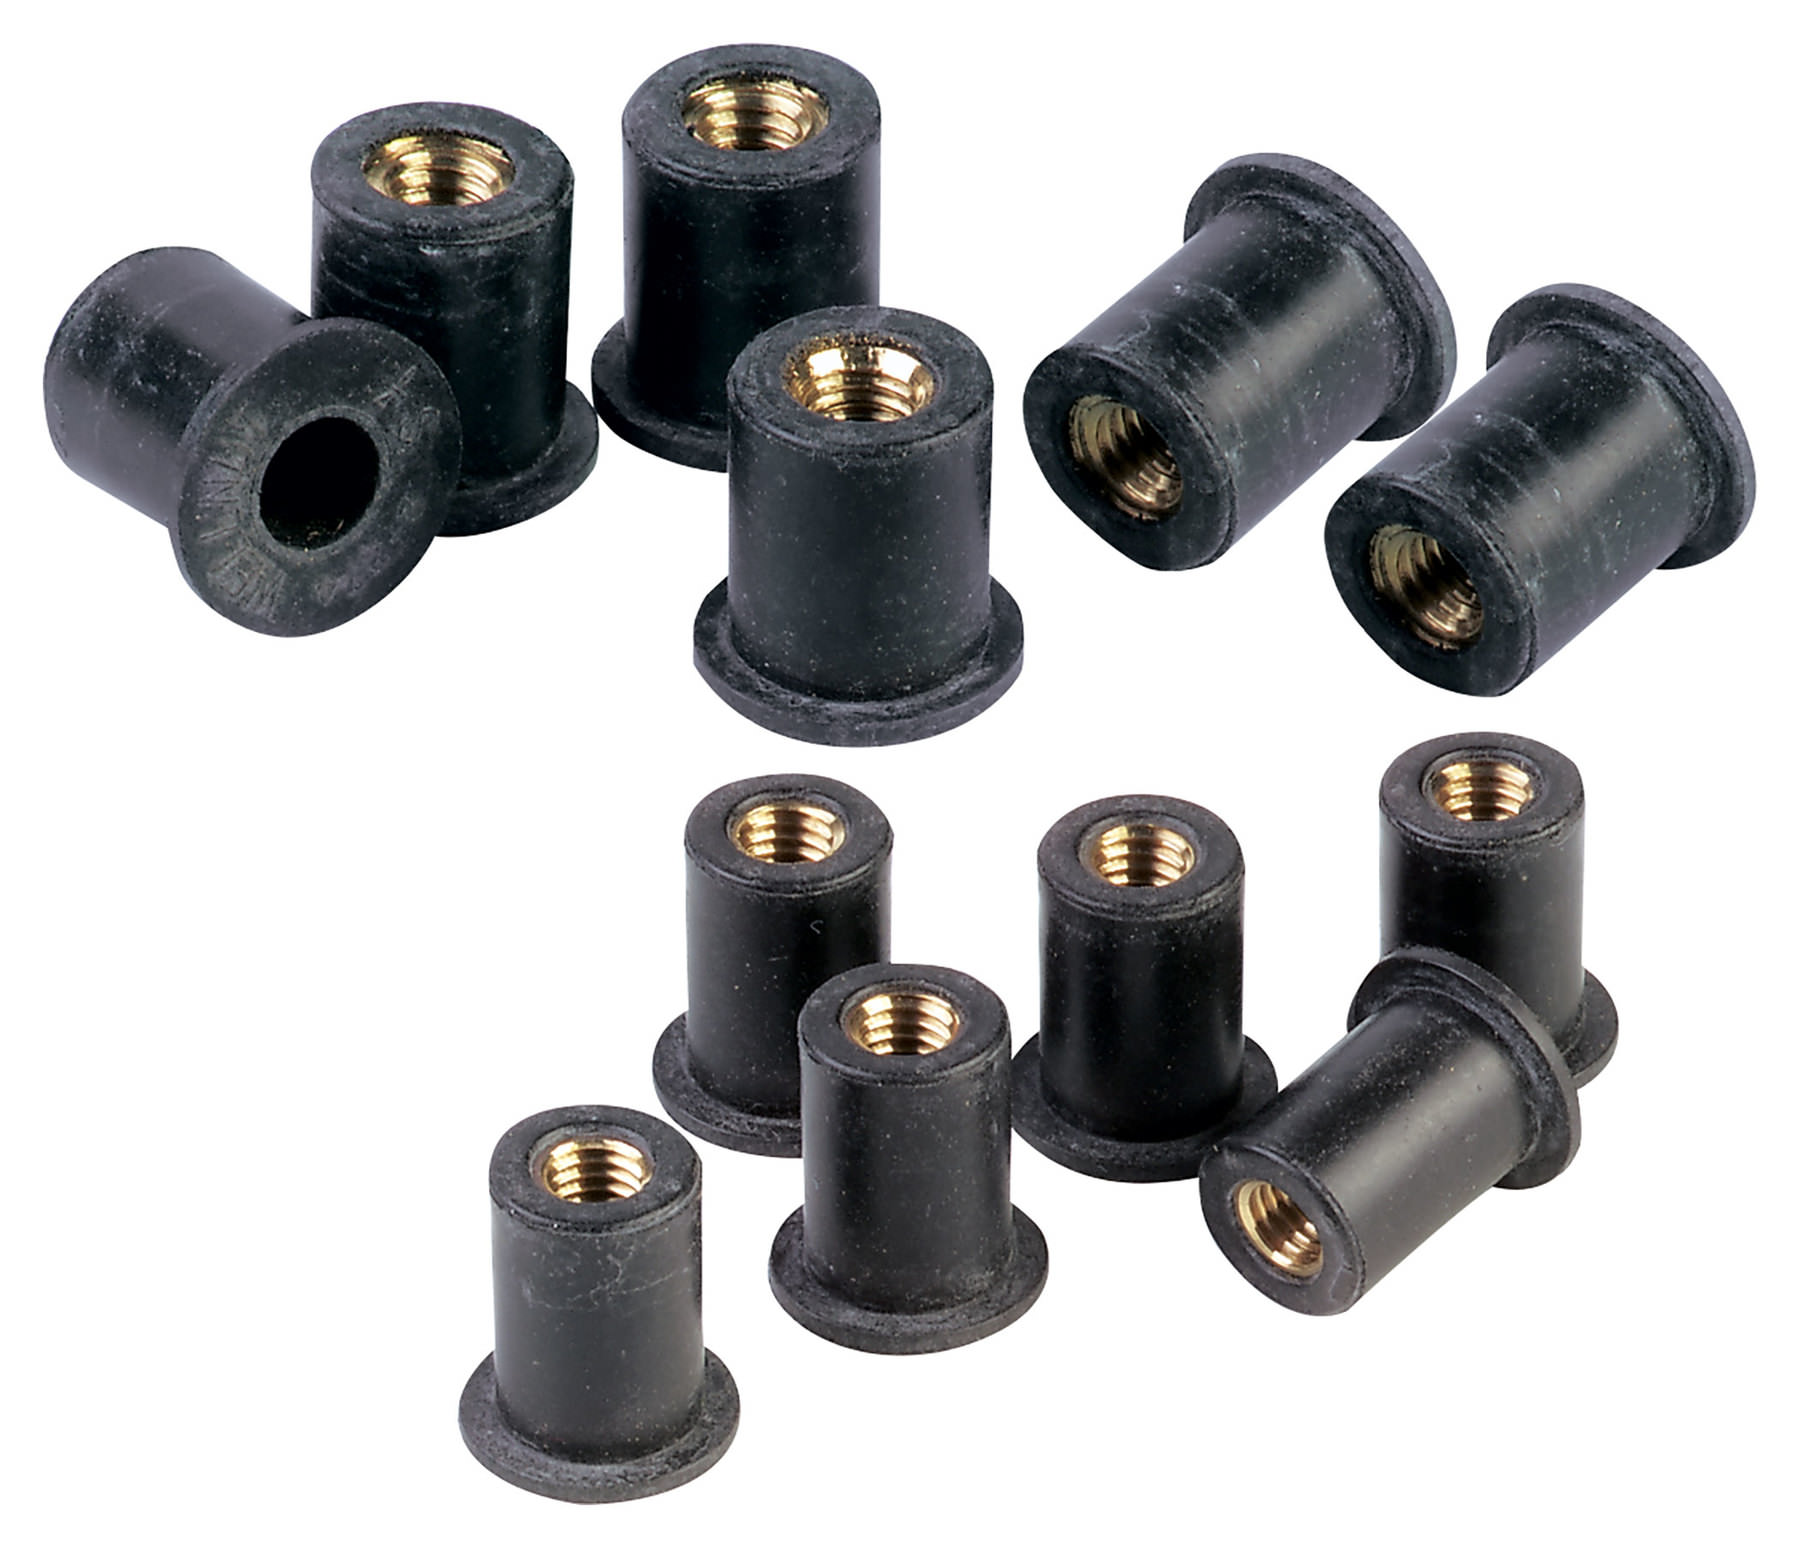 PACK OF SIX M5 5mm RUBBER WELL NUTS M5 FOR FAIRINGS SCREEN BOLTS ETC M5 X 12